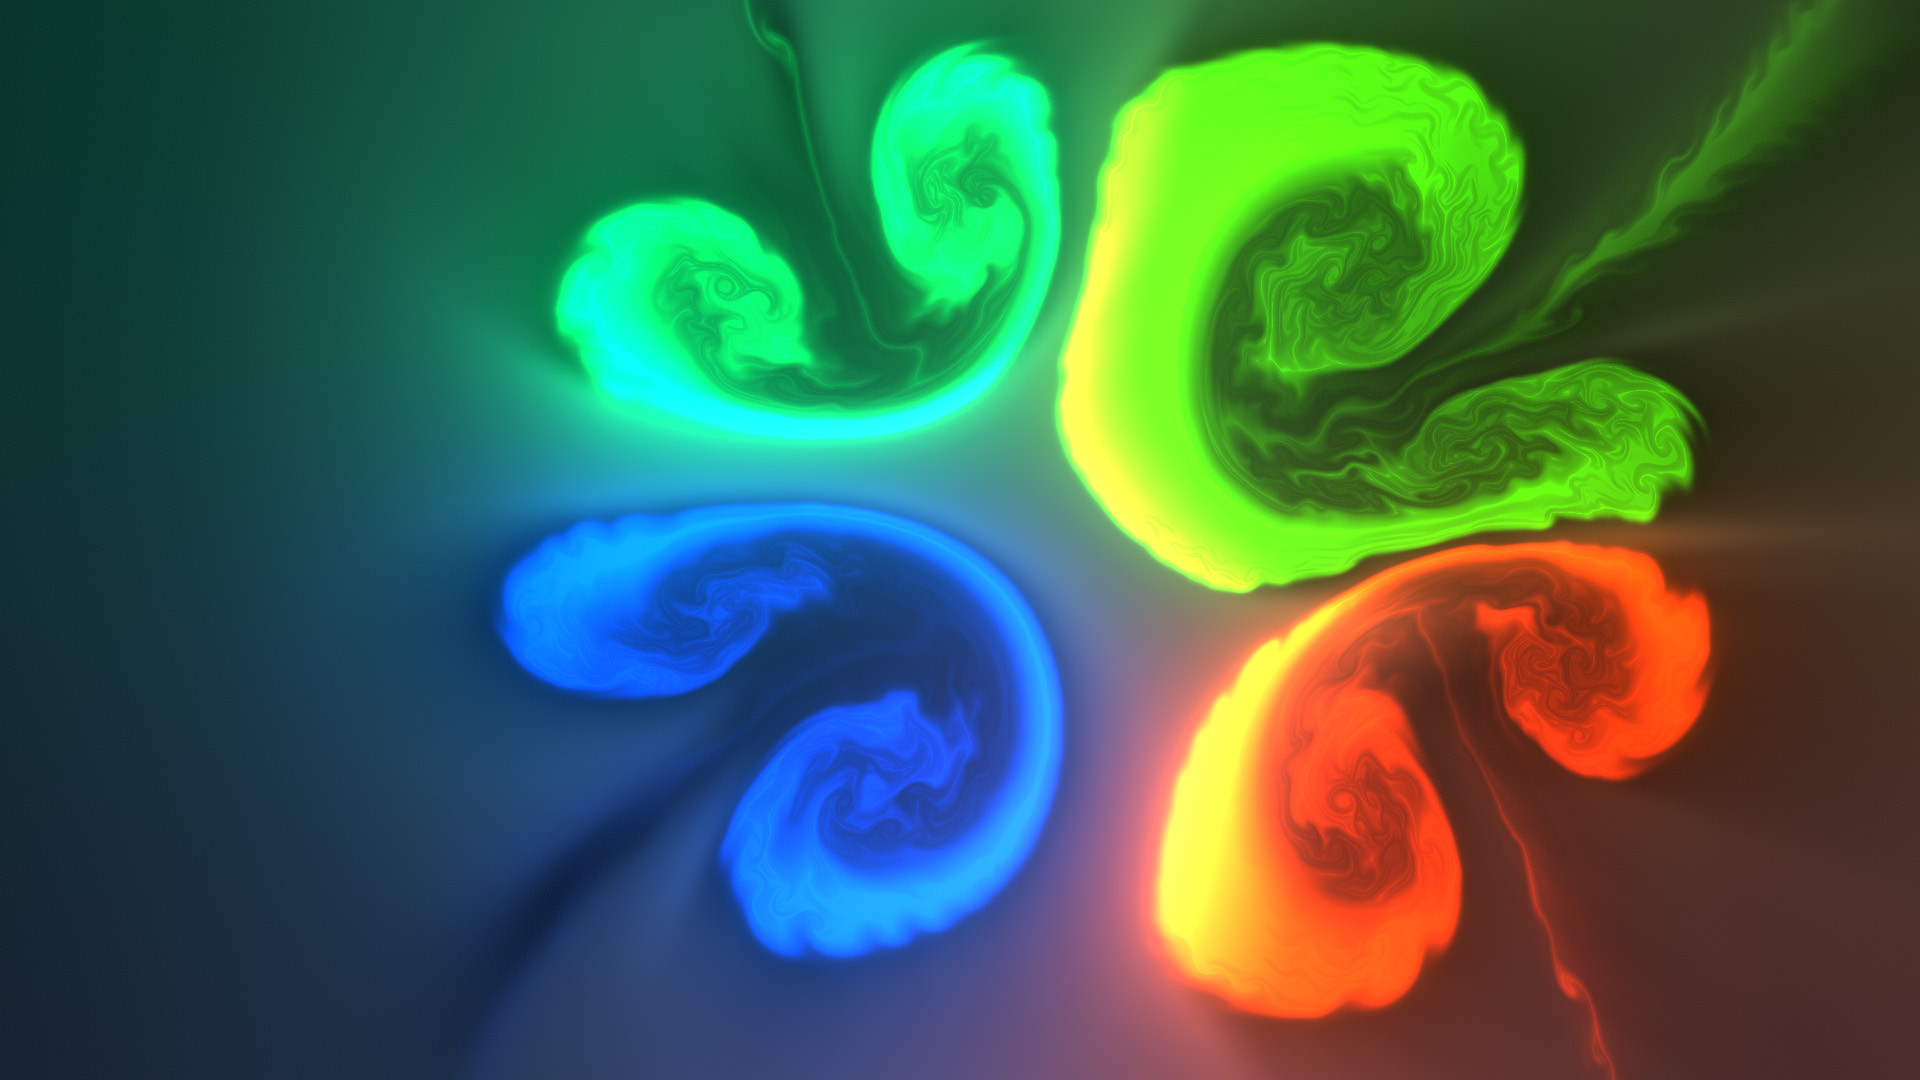 Free download Fluid Engine PC Live Wallpaper on Steam [1920x1080] for